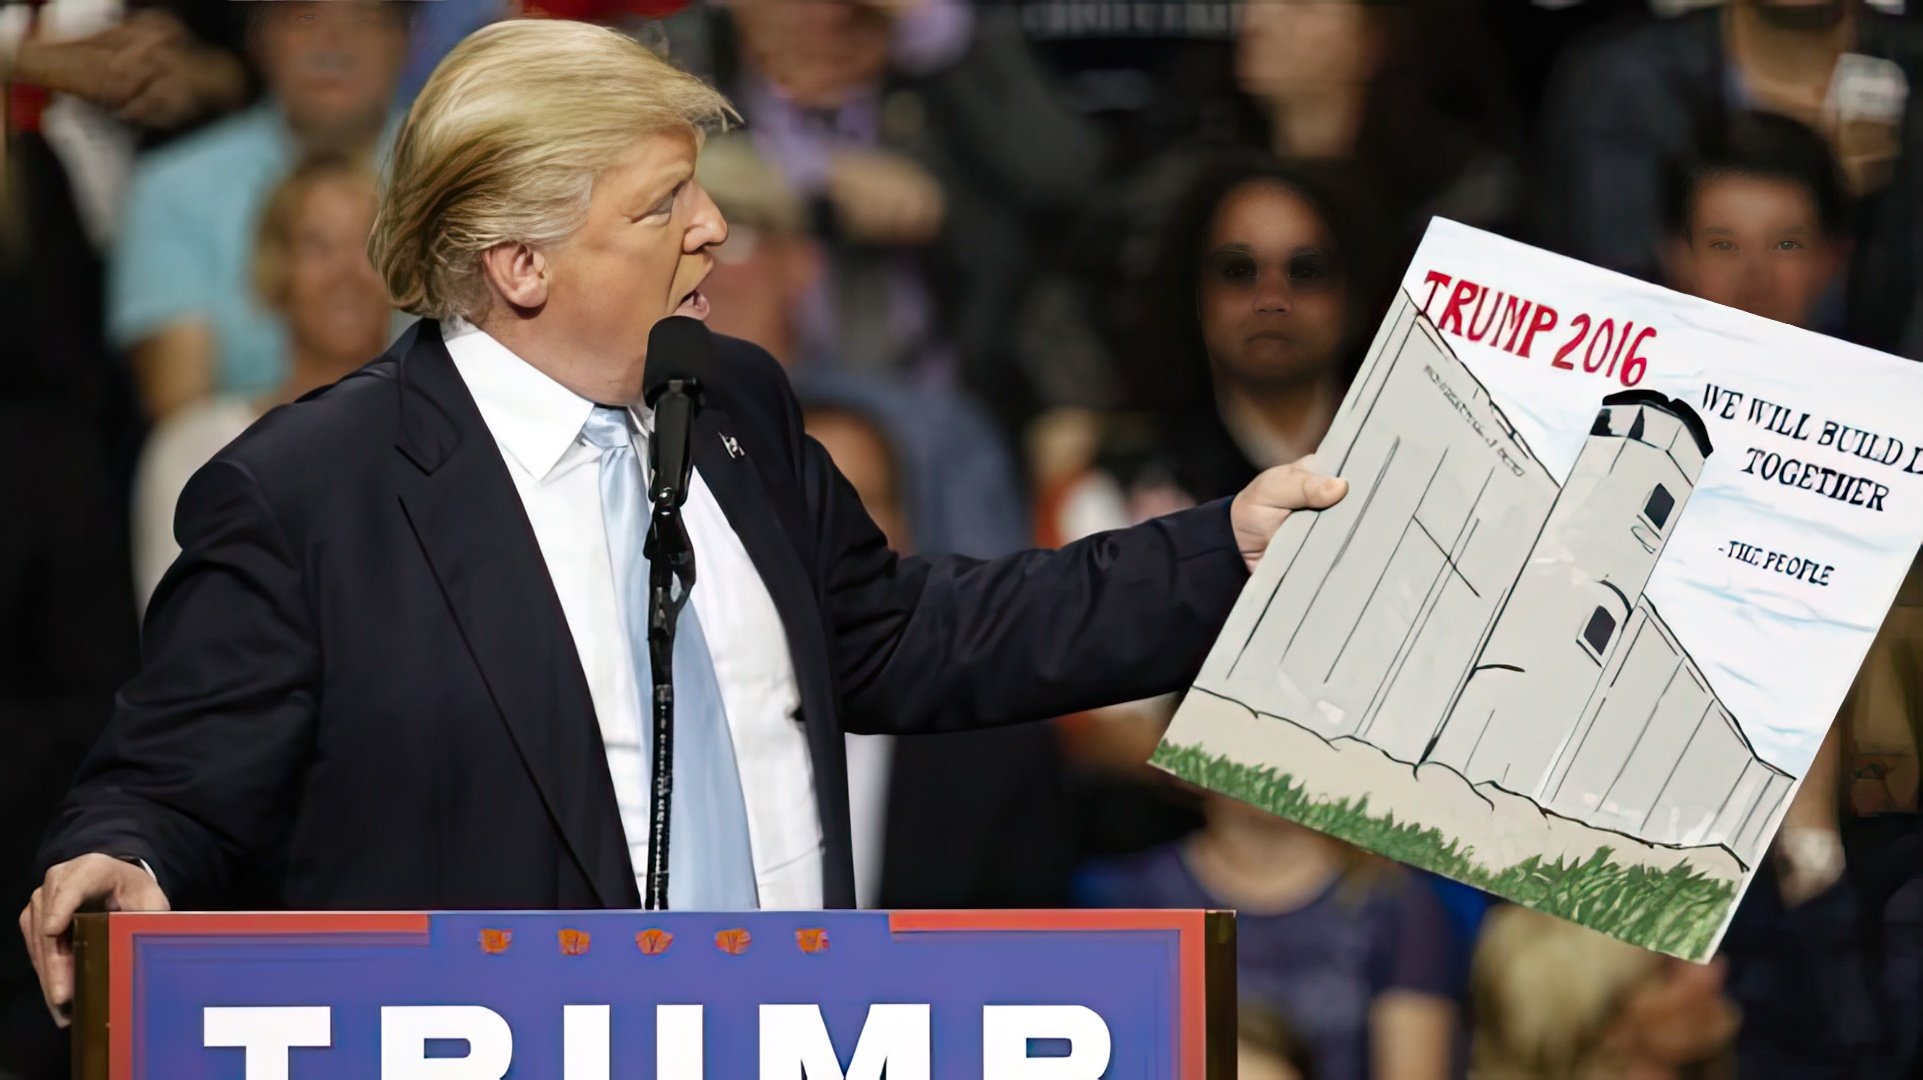 Donald Trump with the Mexican Wall Project